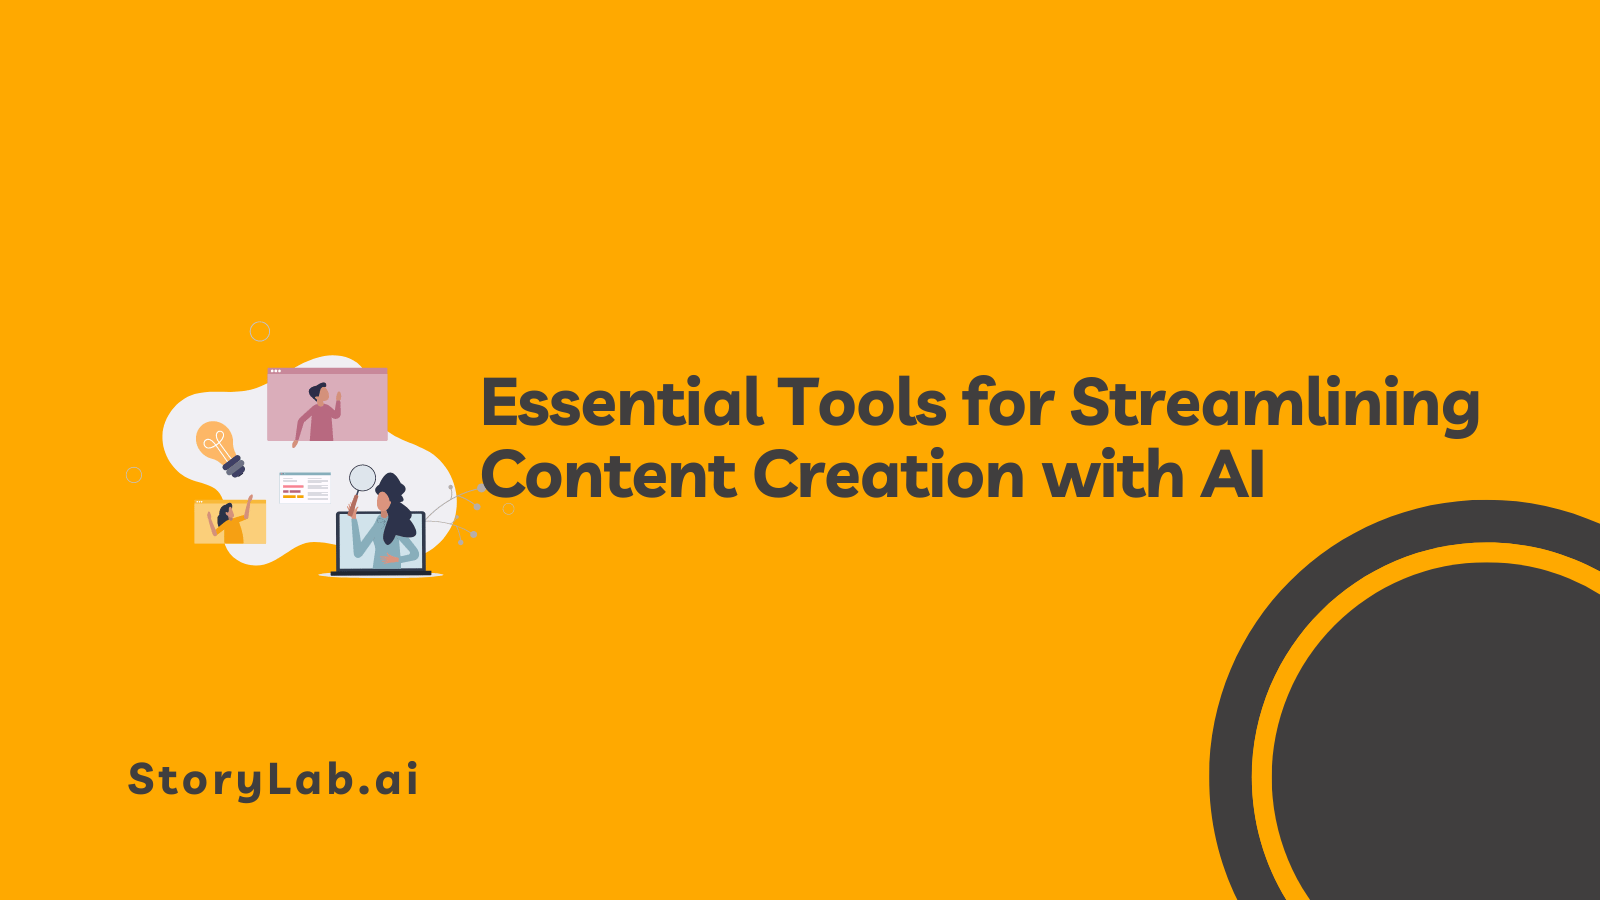 Essential Tools for Streamlining Content Creation with AI